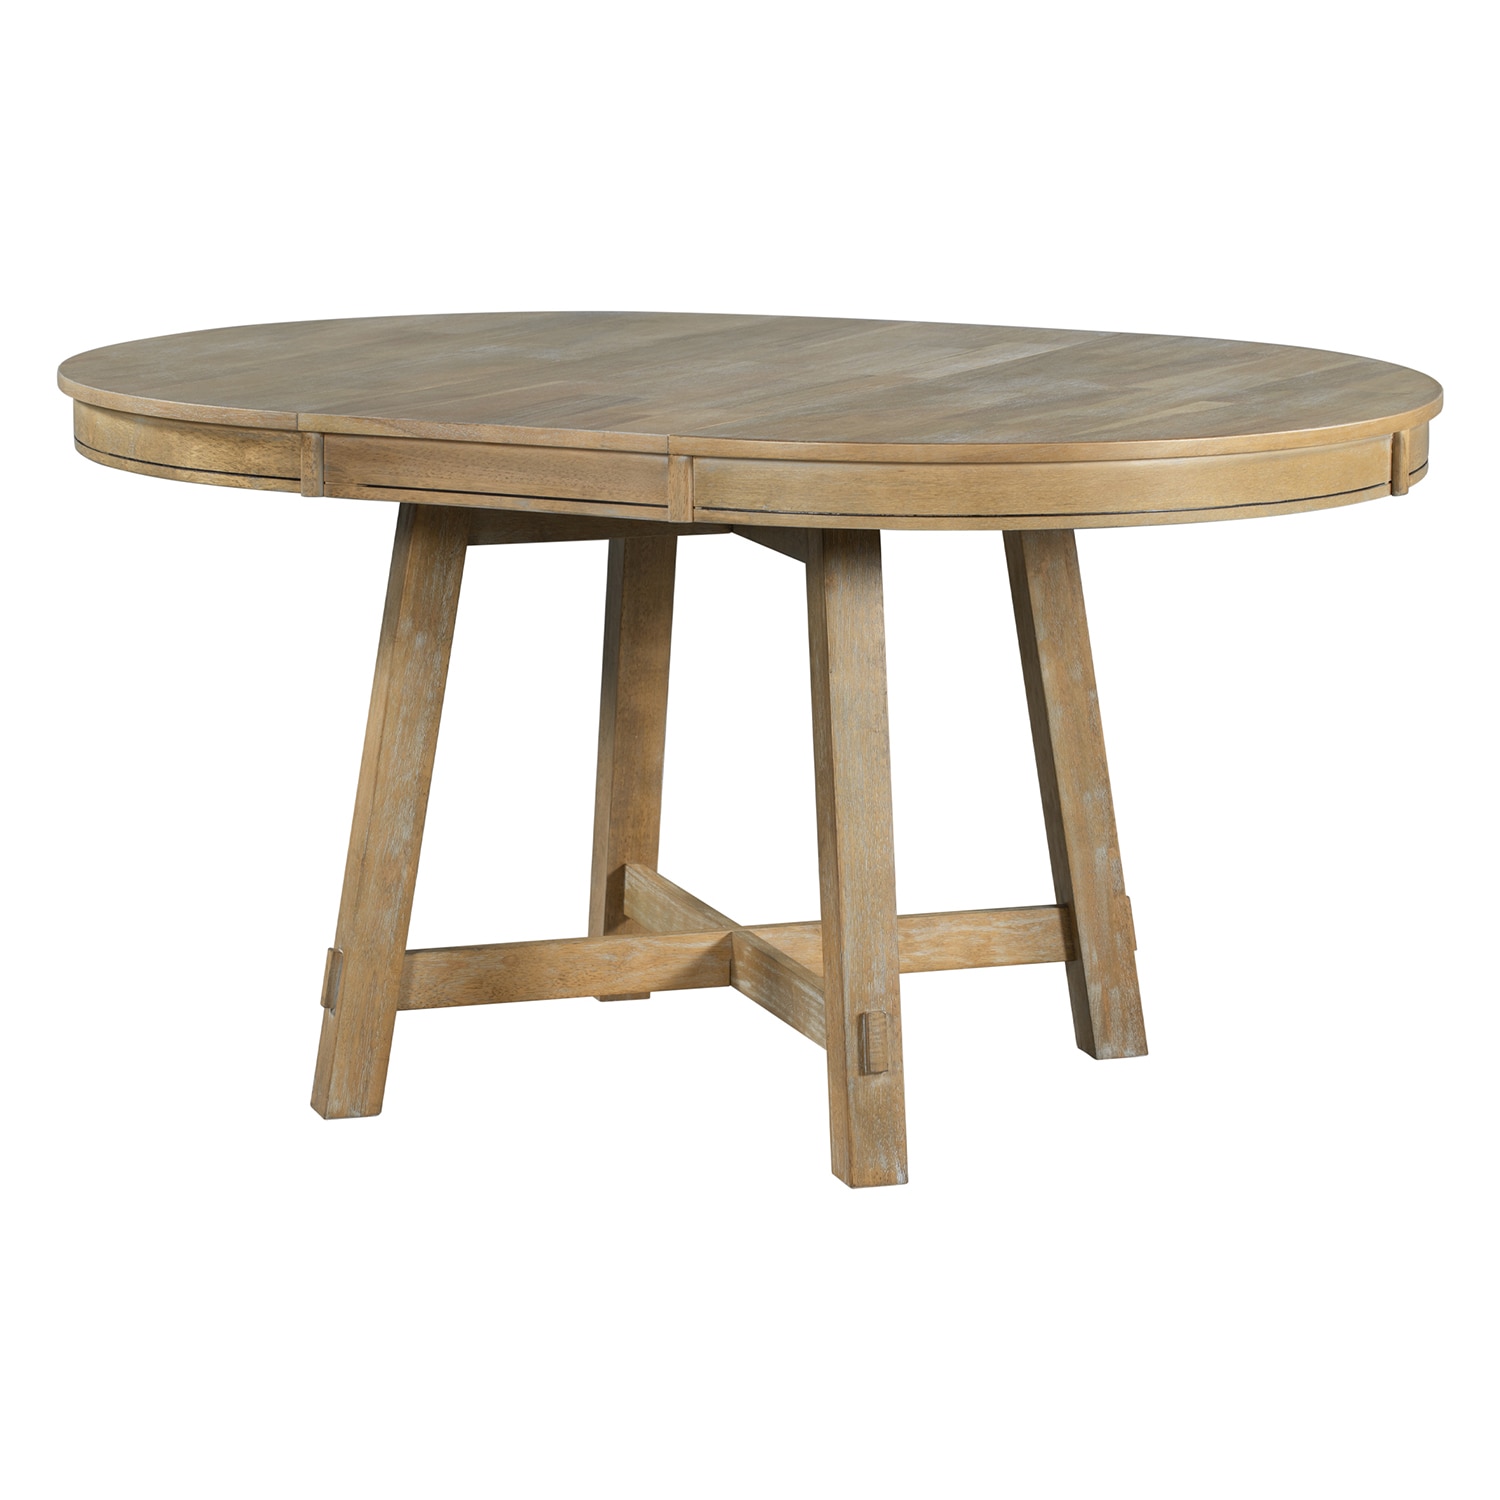 Round Dining Tables at Lowes.com